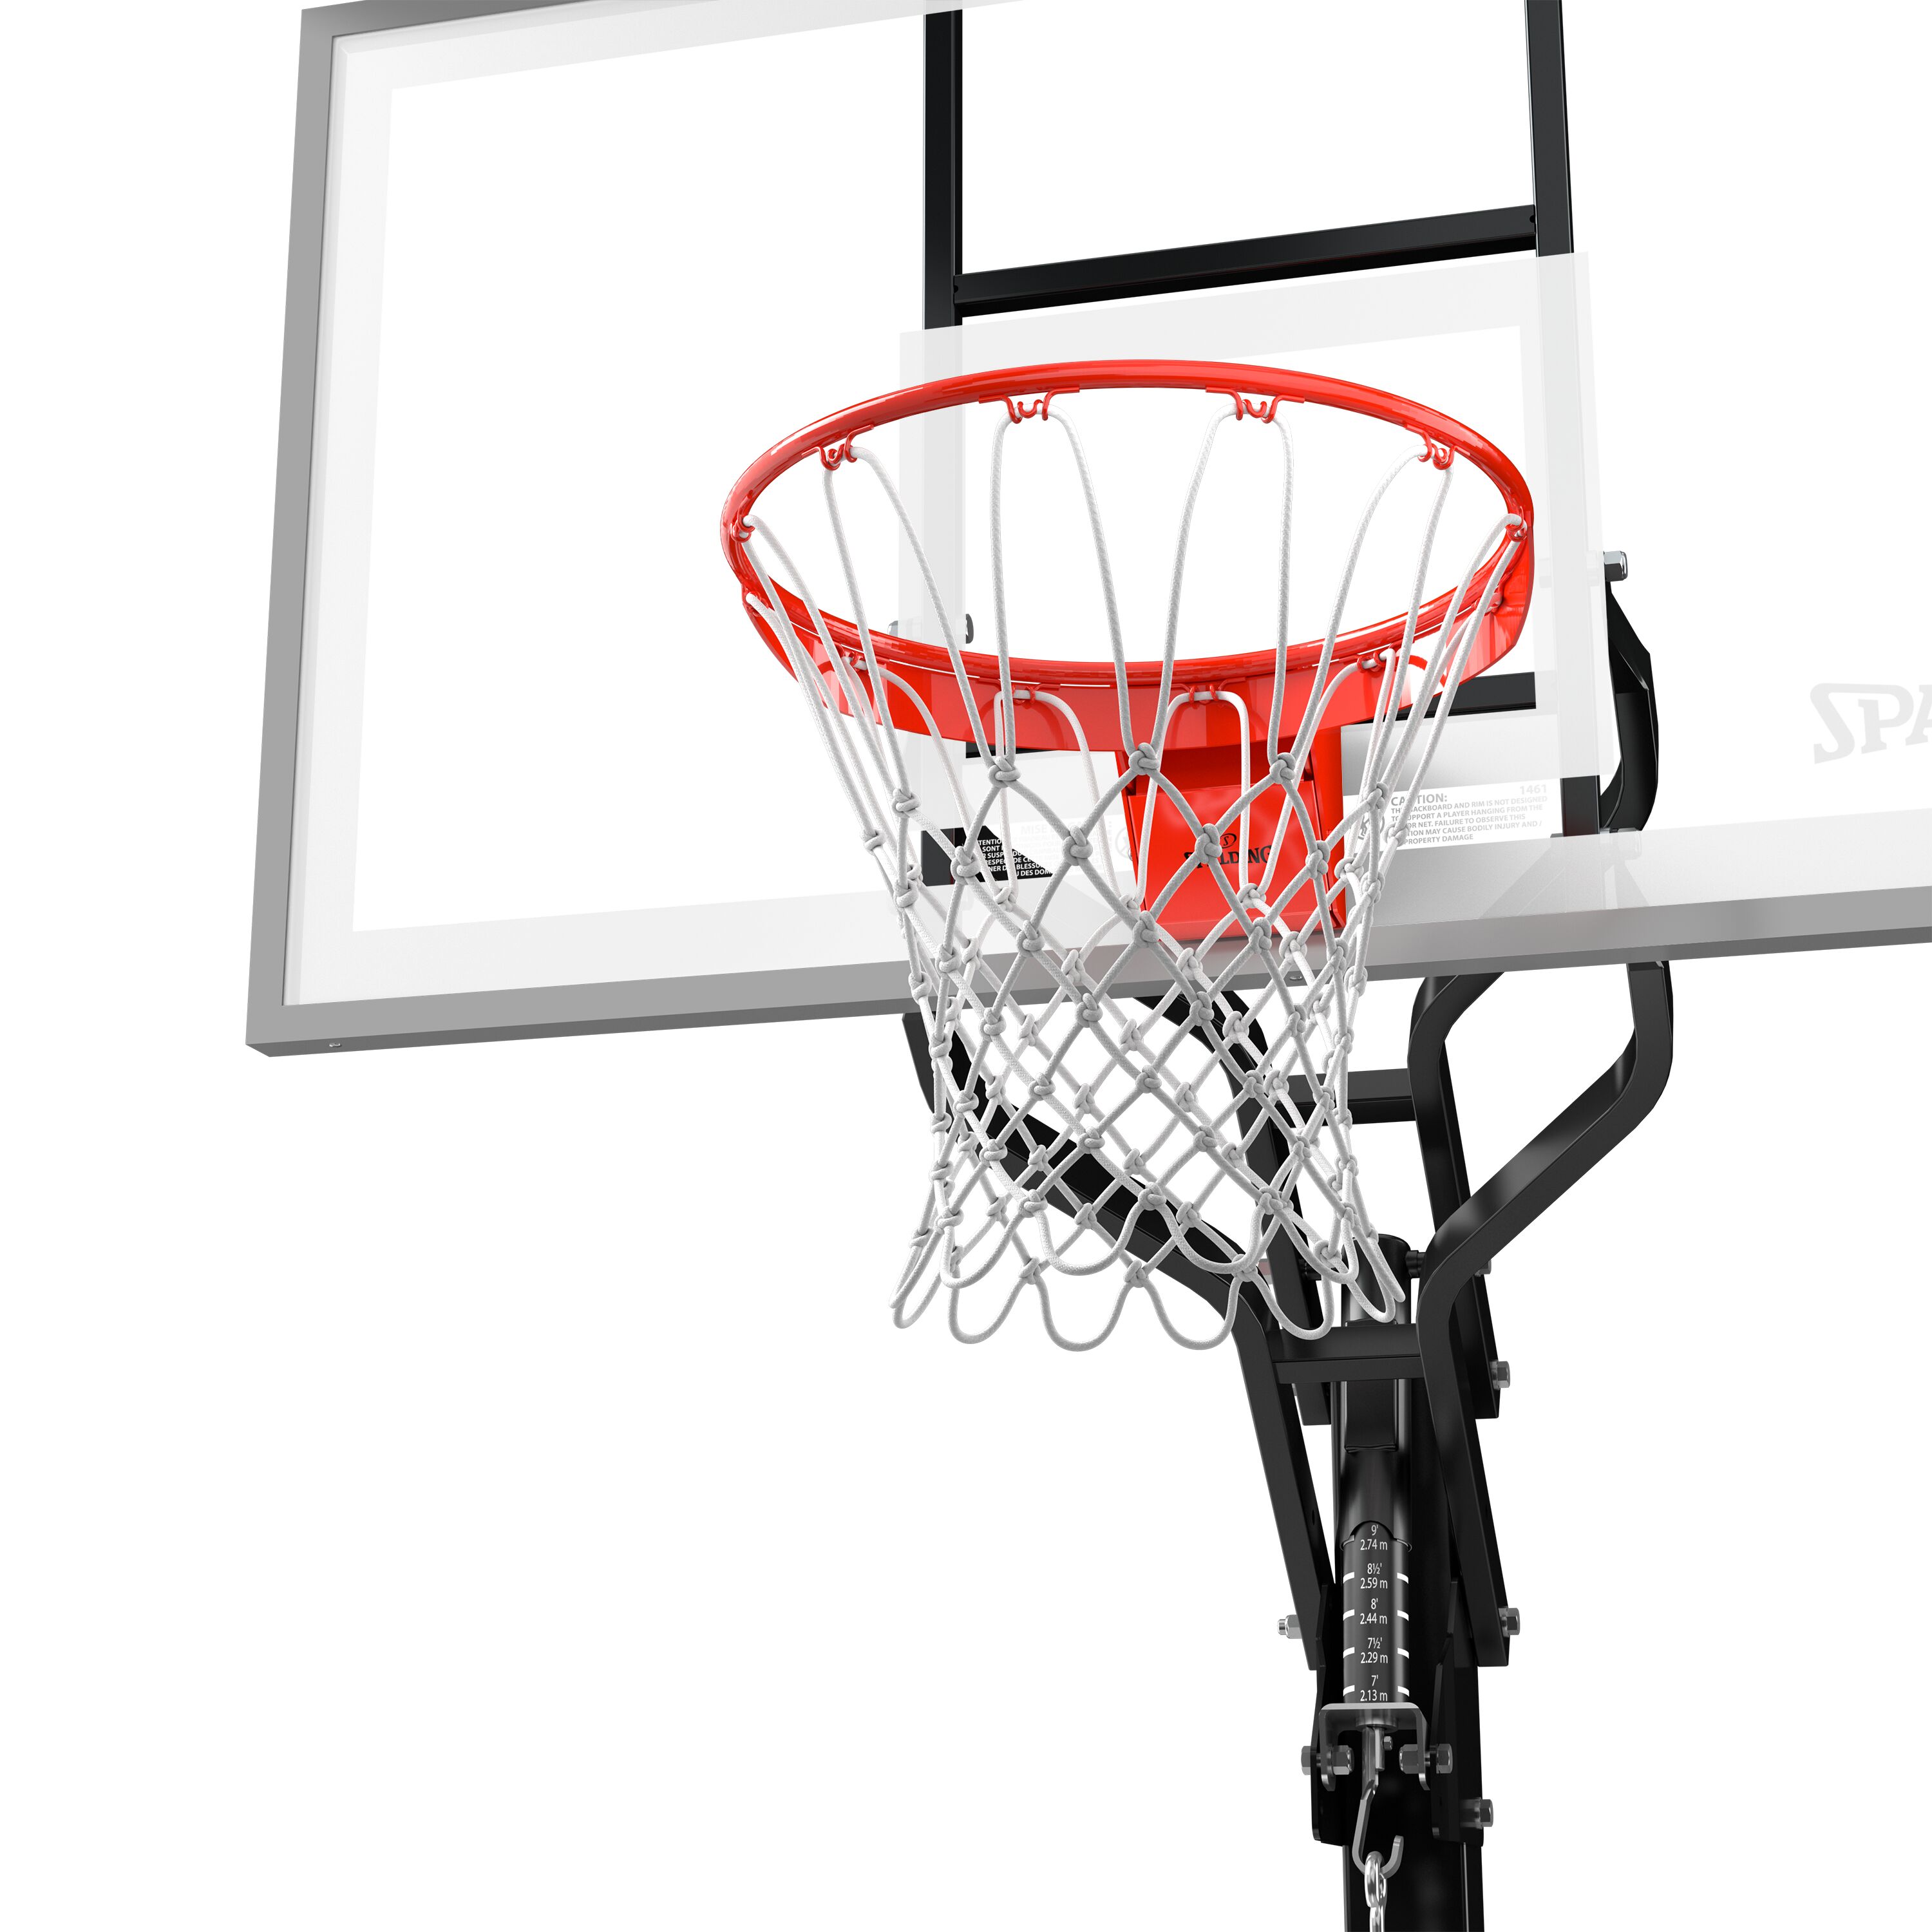 Spalding 60 In. Tempered Glass U-Turn® In Ground Basketball Systems Hoop - image 5 of 6